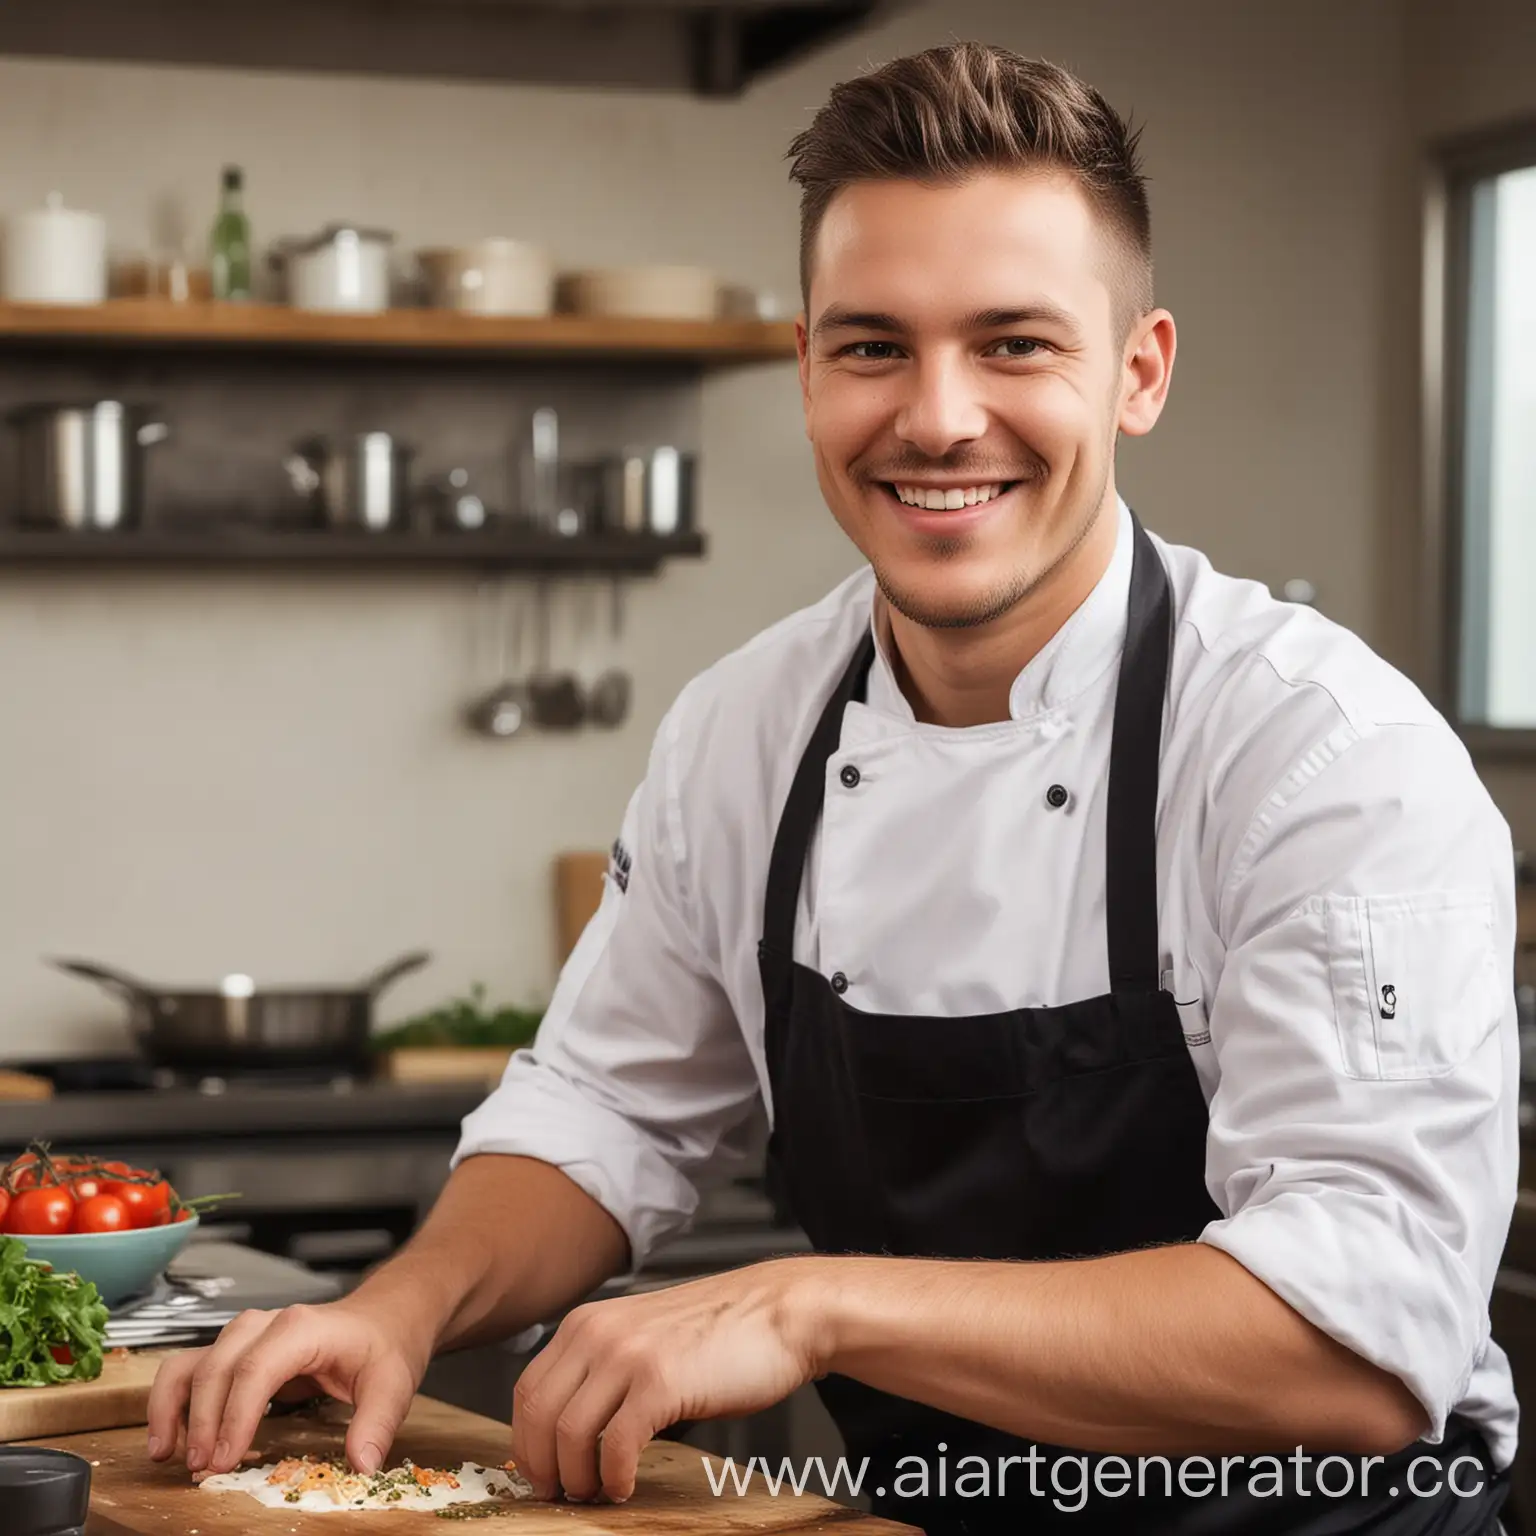 Young-Chef-Smiling-While-Working-on-a-Culinary-Creation